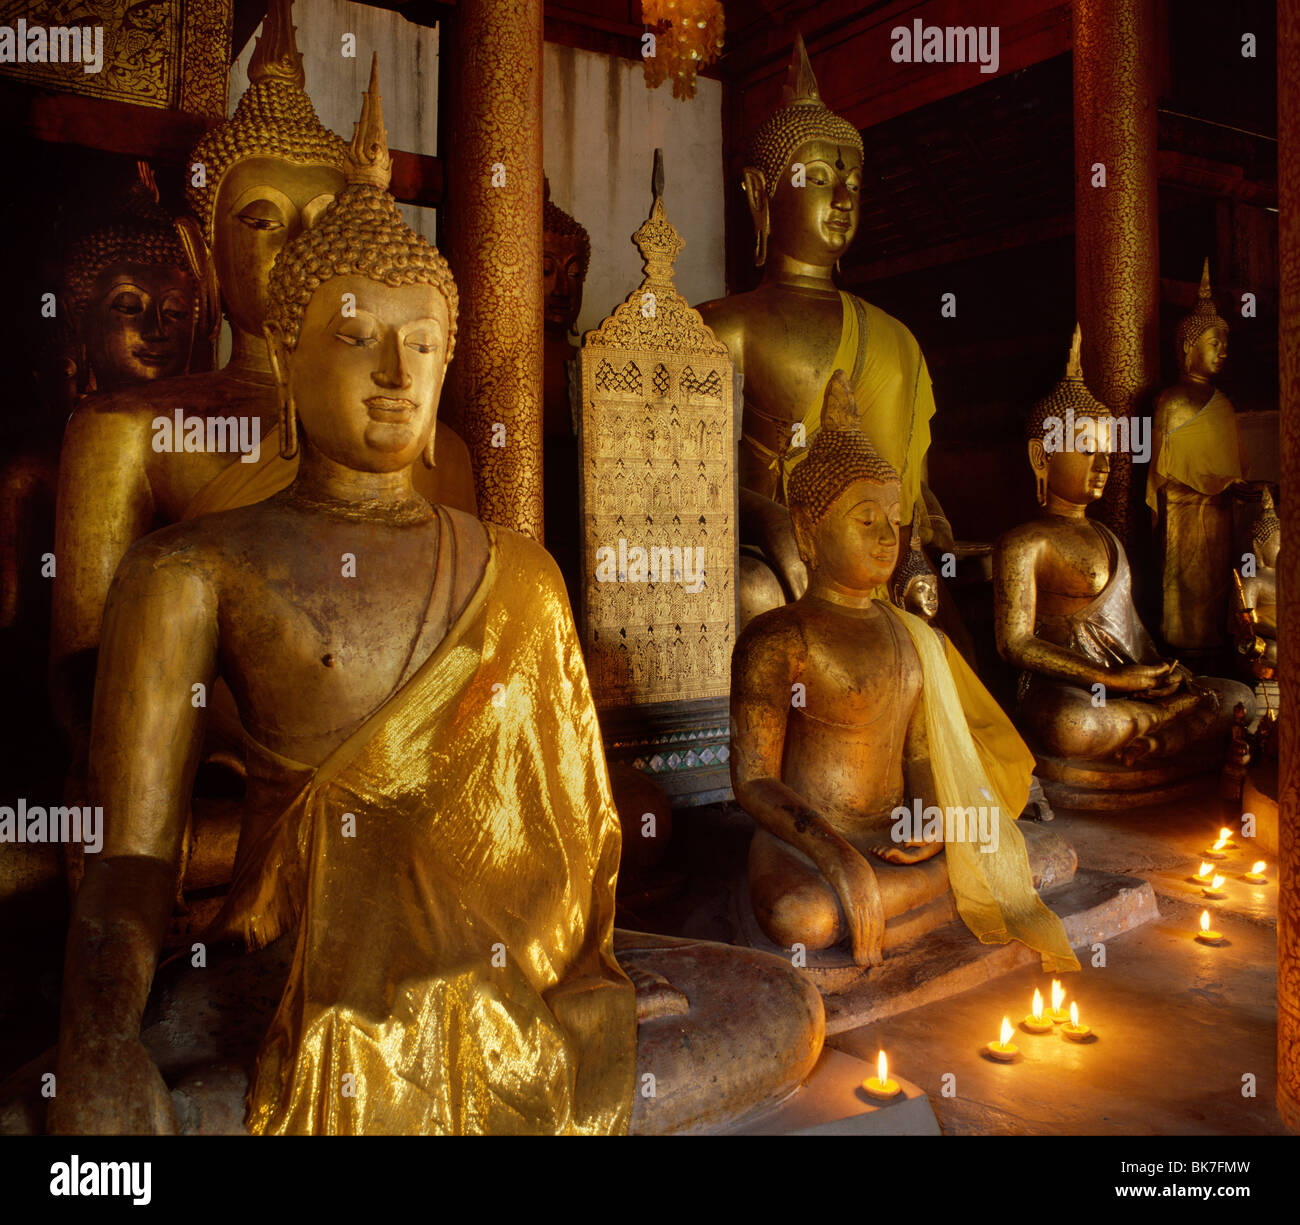 Collection of 15th century Lanna images and early Ayutthaya images preserved at Wat Chiang Man, Chiang Mai, Thailand Stock Photo